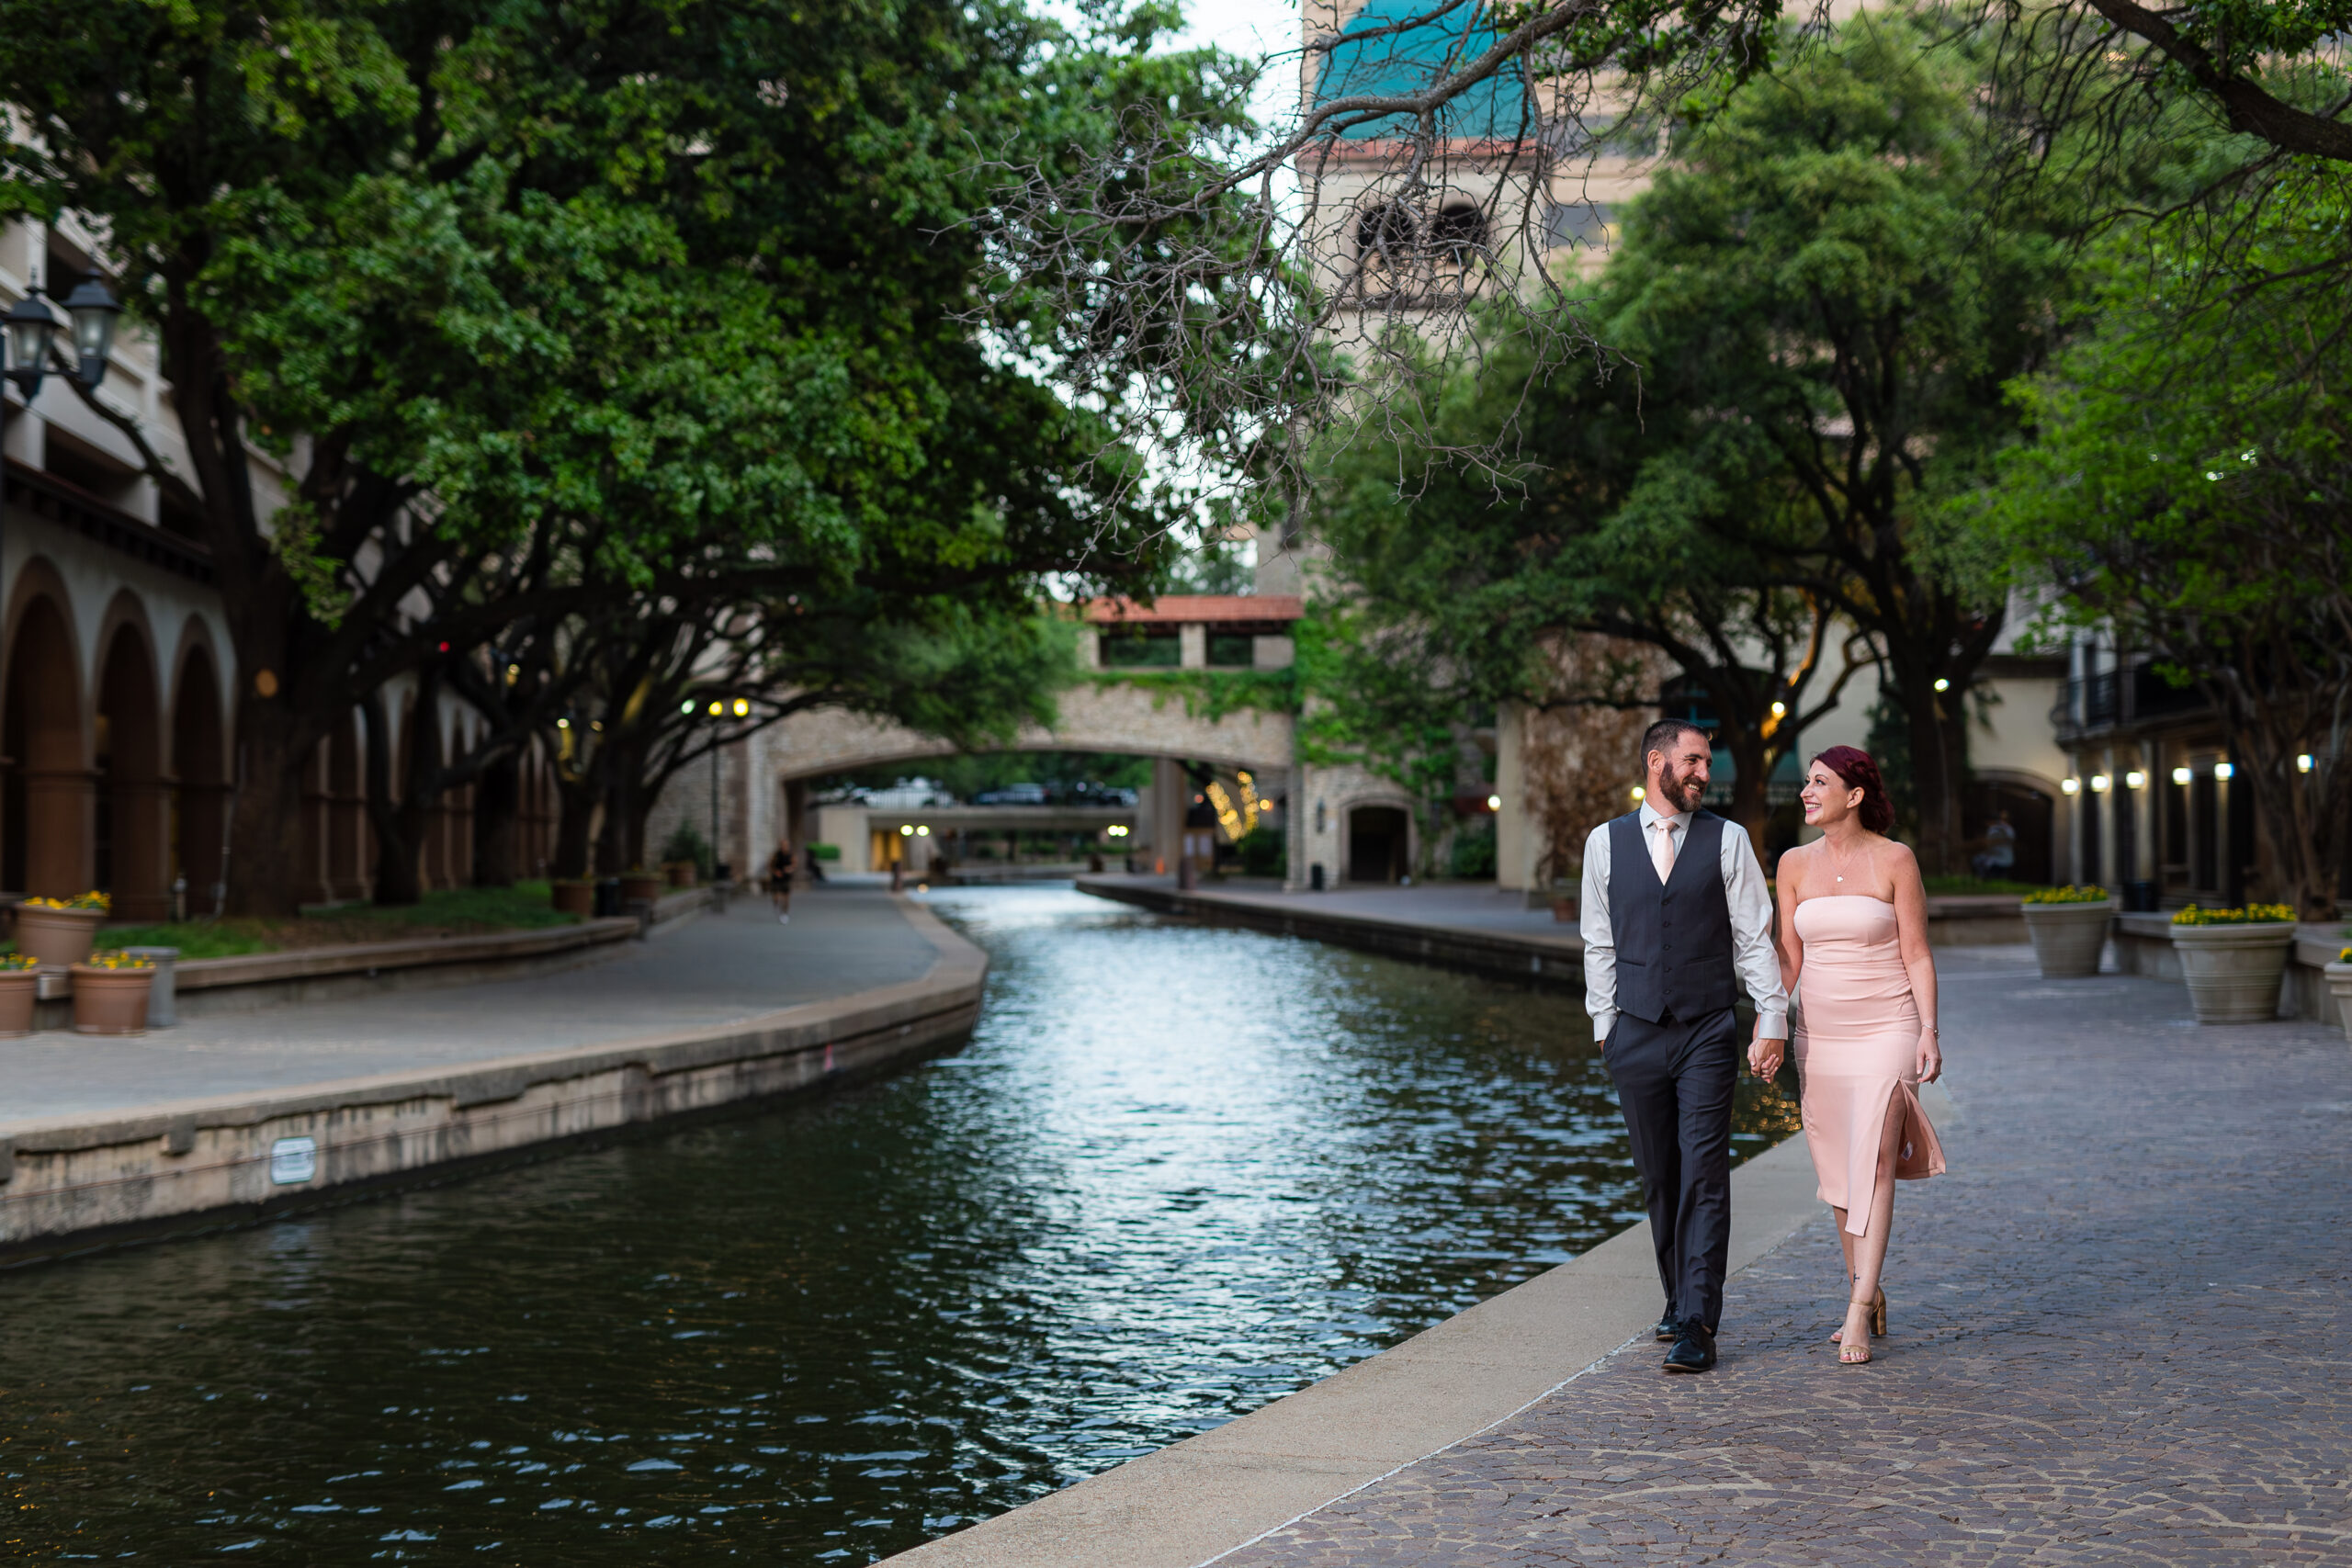 Engagement Photographer Dallas captures couple walking hand in hand during engagement photos